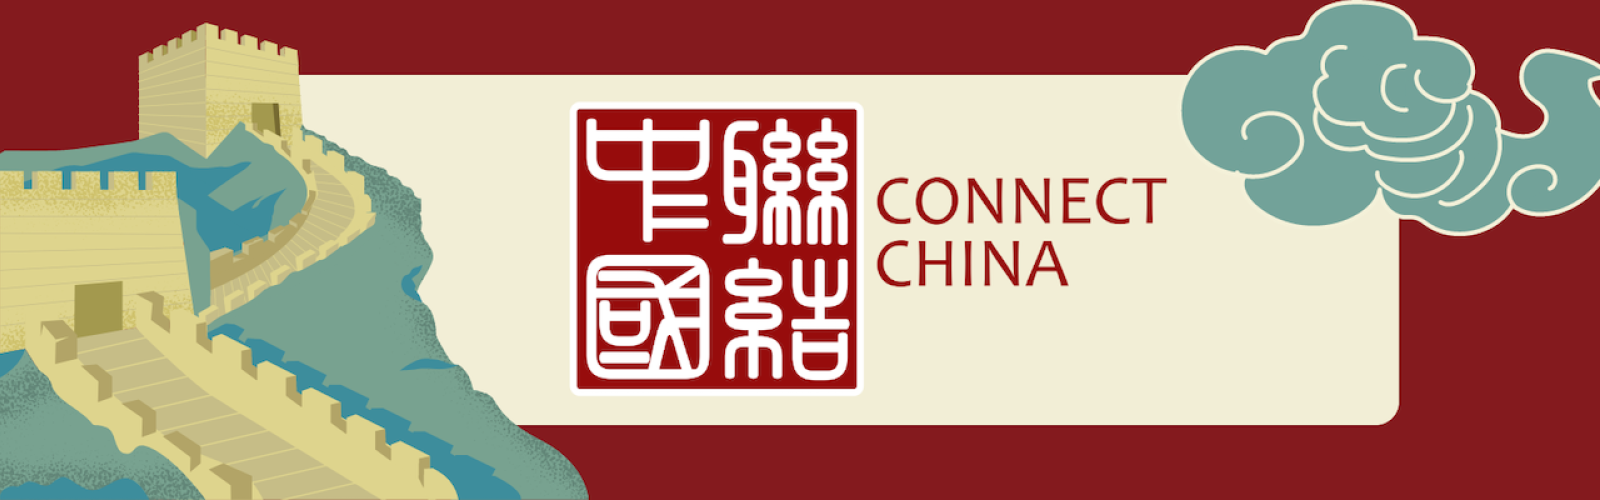 SMU Connect China Cover